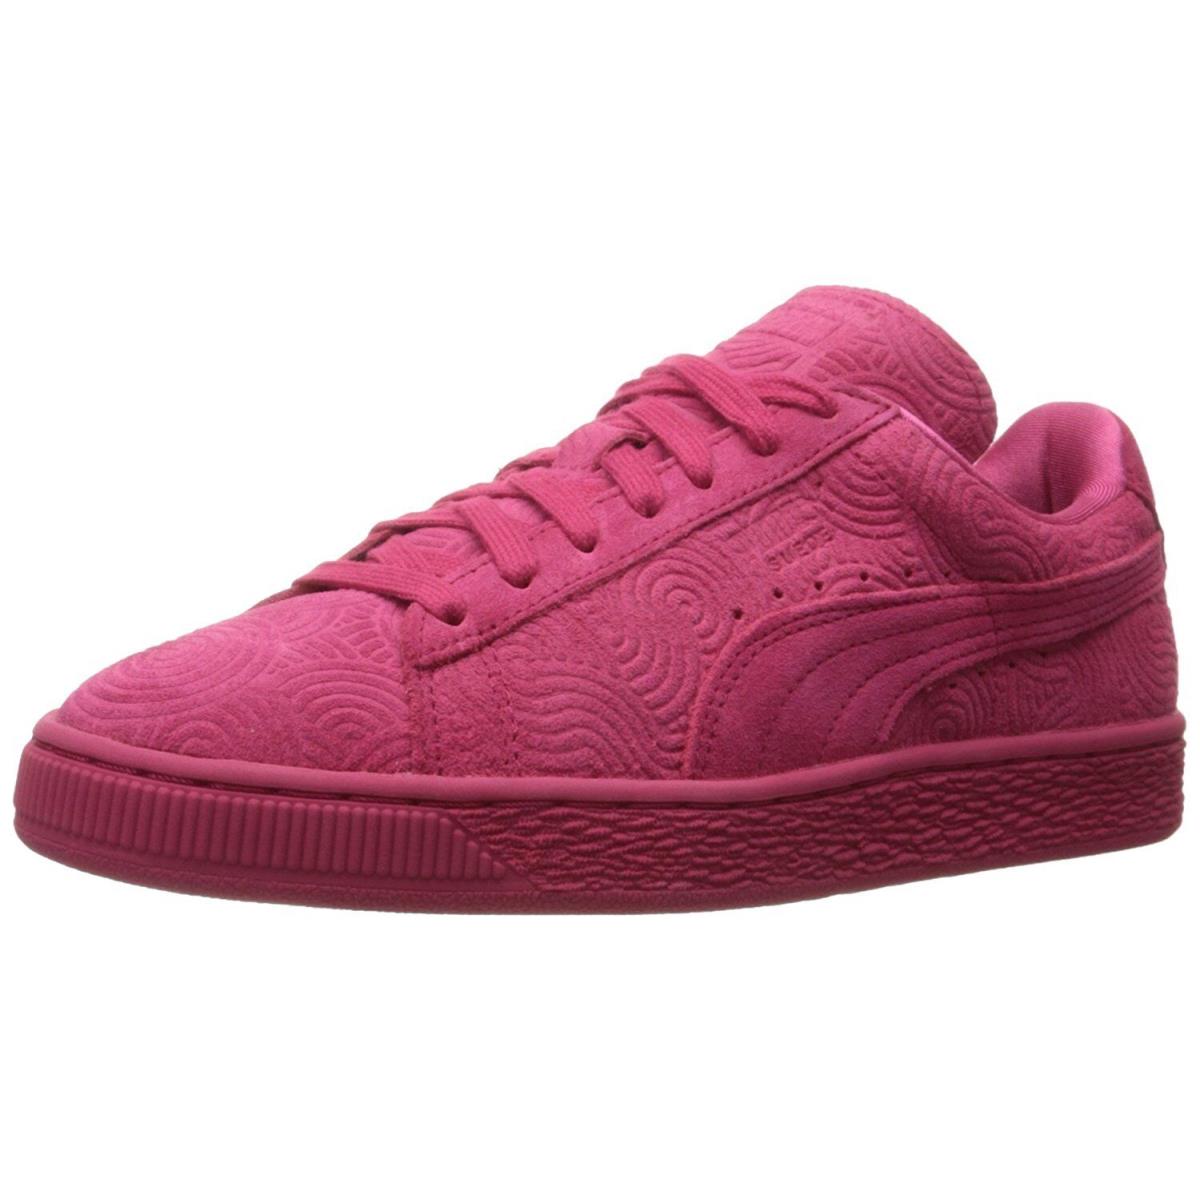 Women`s Puma Suede Classic + Colored Sneakers 360584 02 Sizes 6.5-9.5 Rose Red - Rose Red/Rose Red